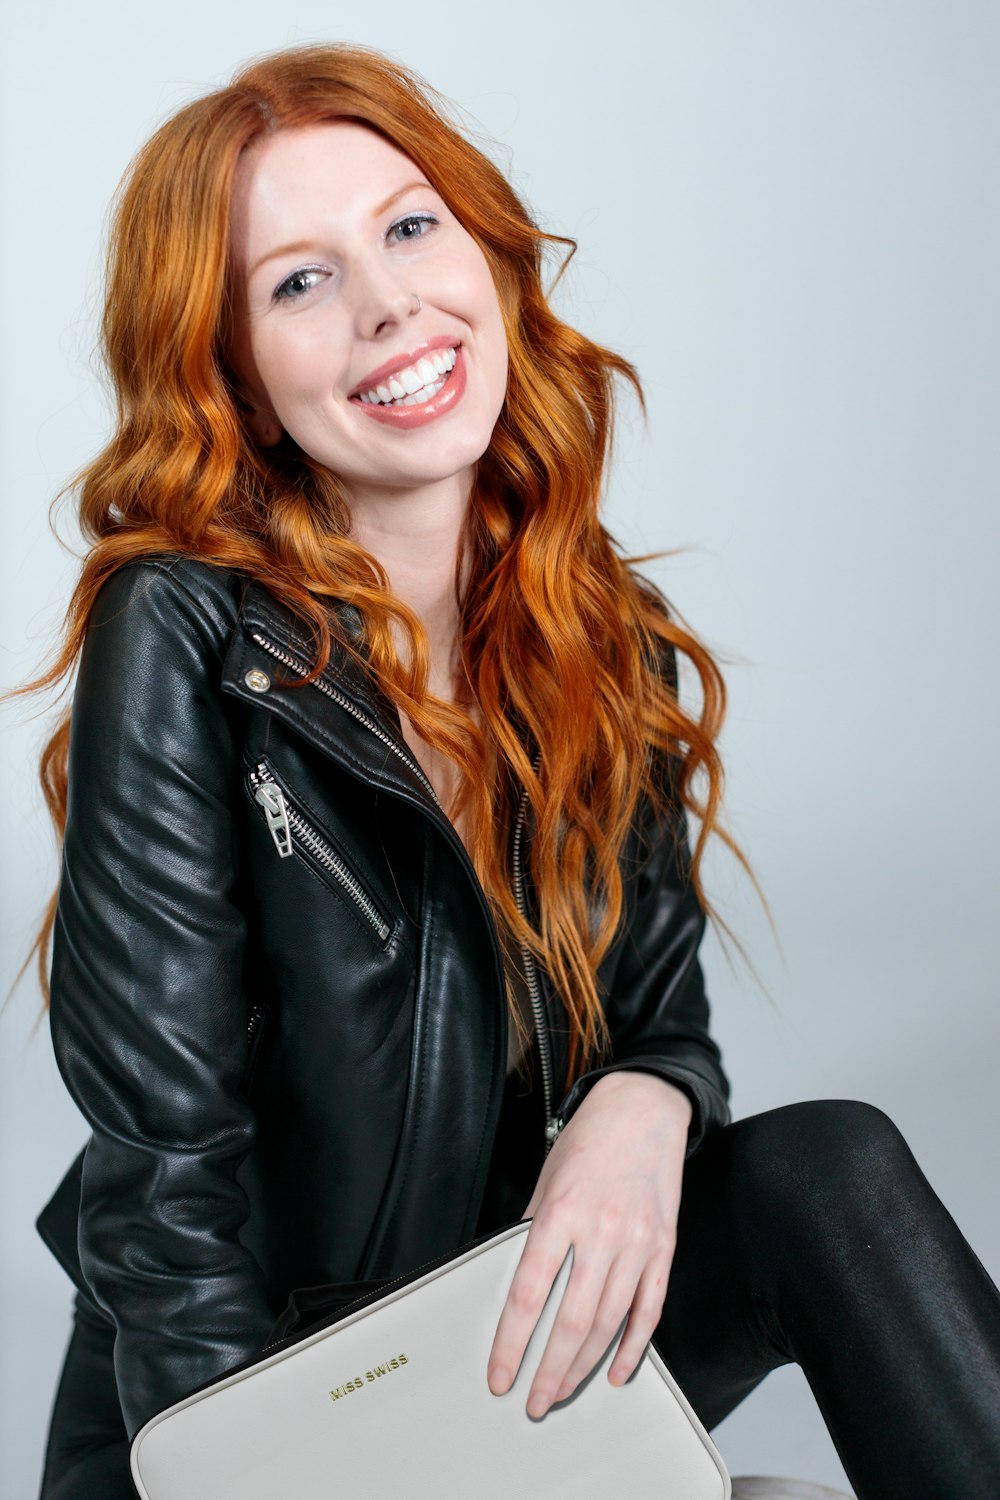 woman in black leather jacket smiling